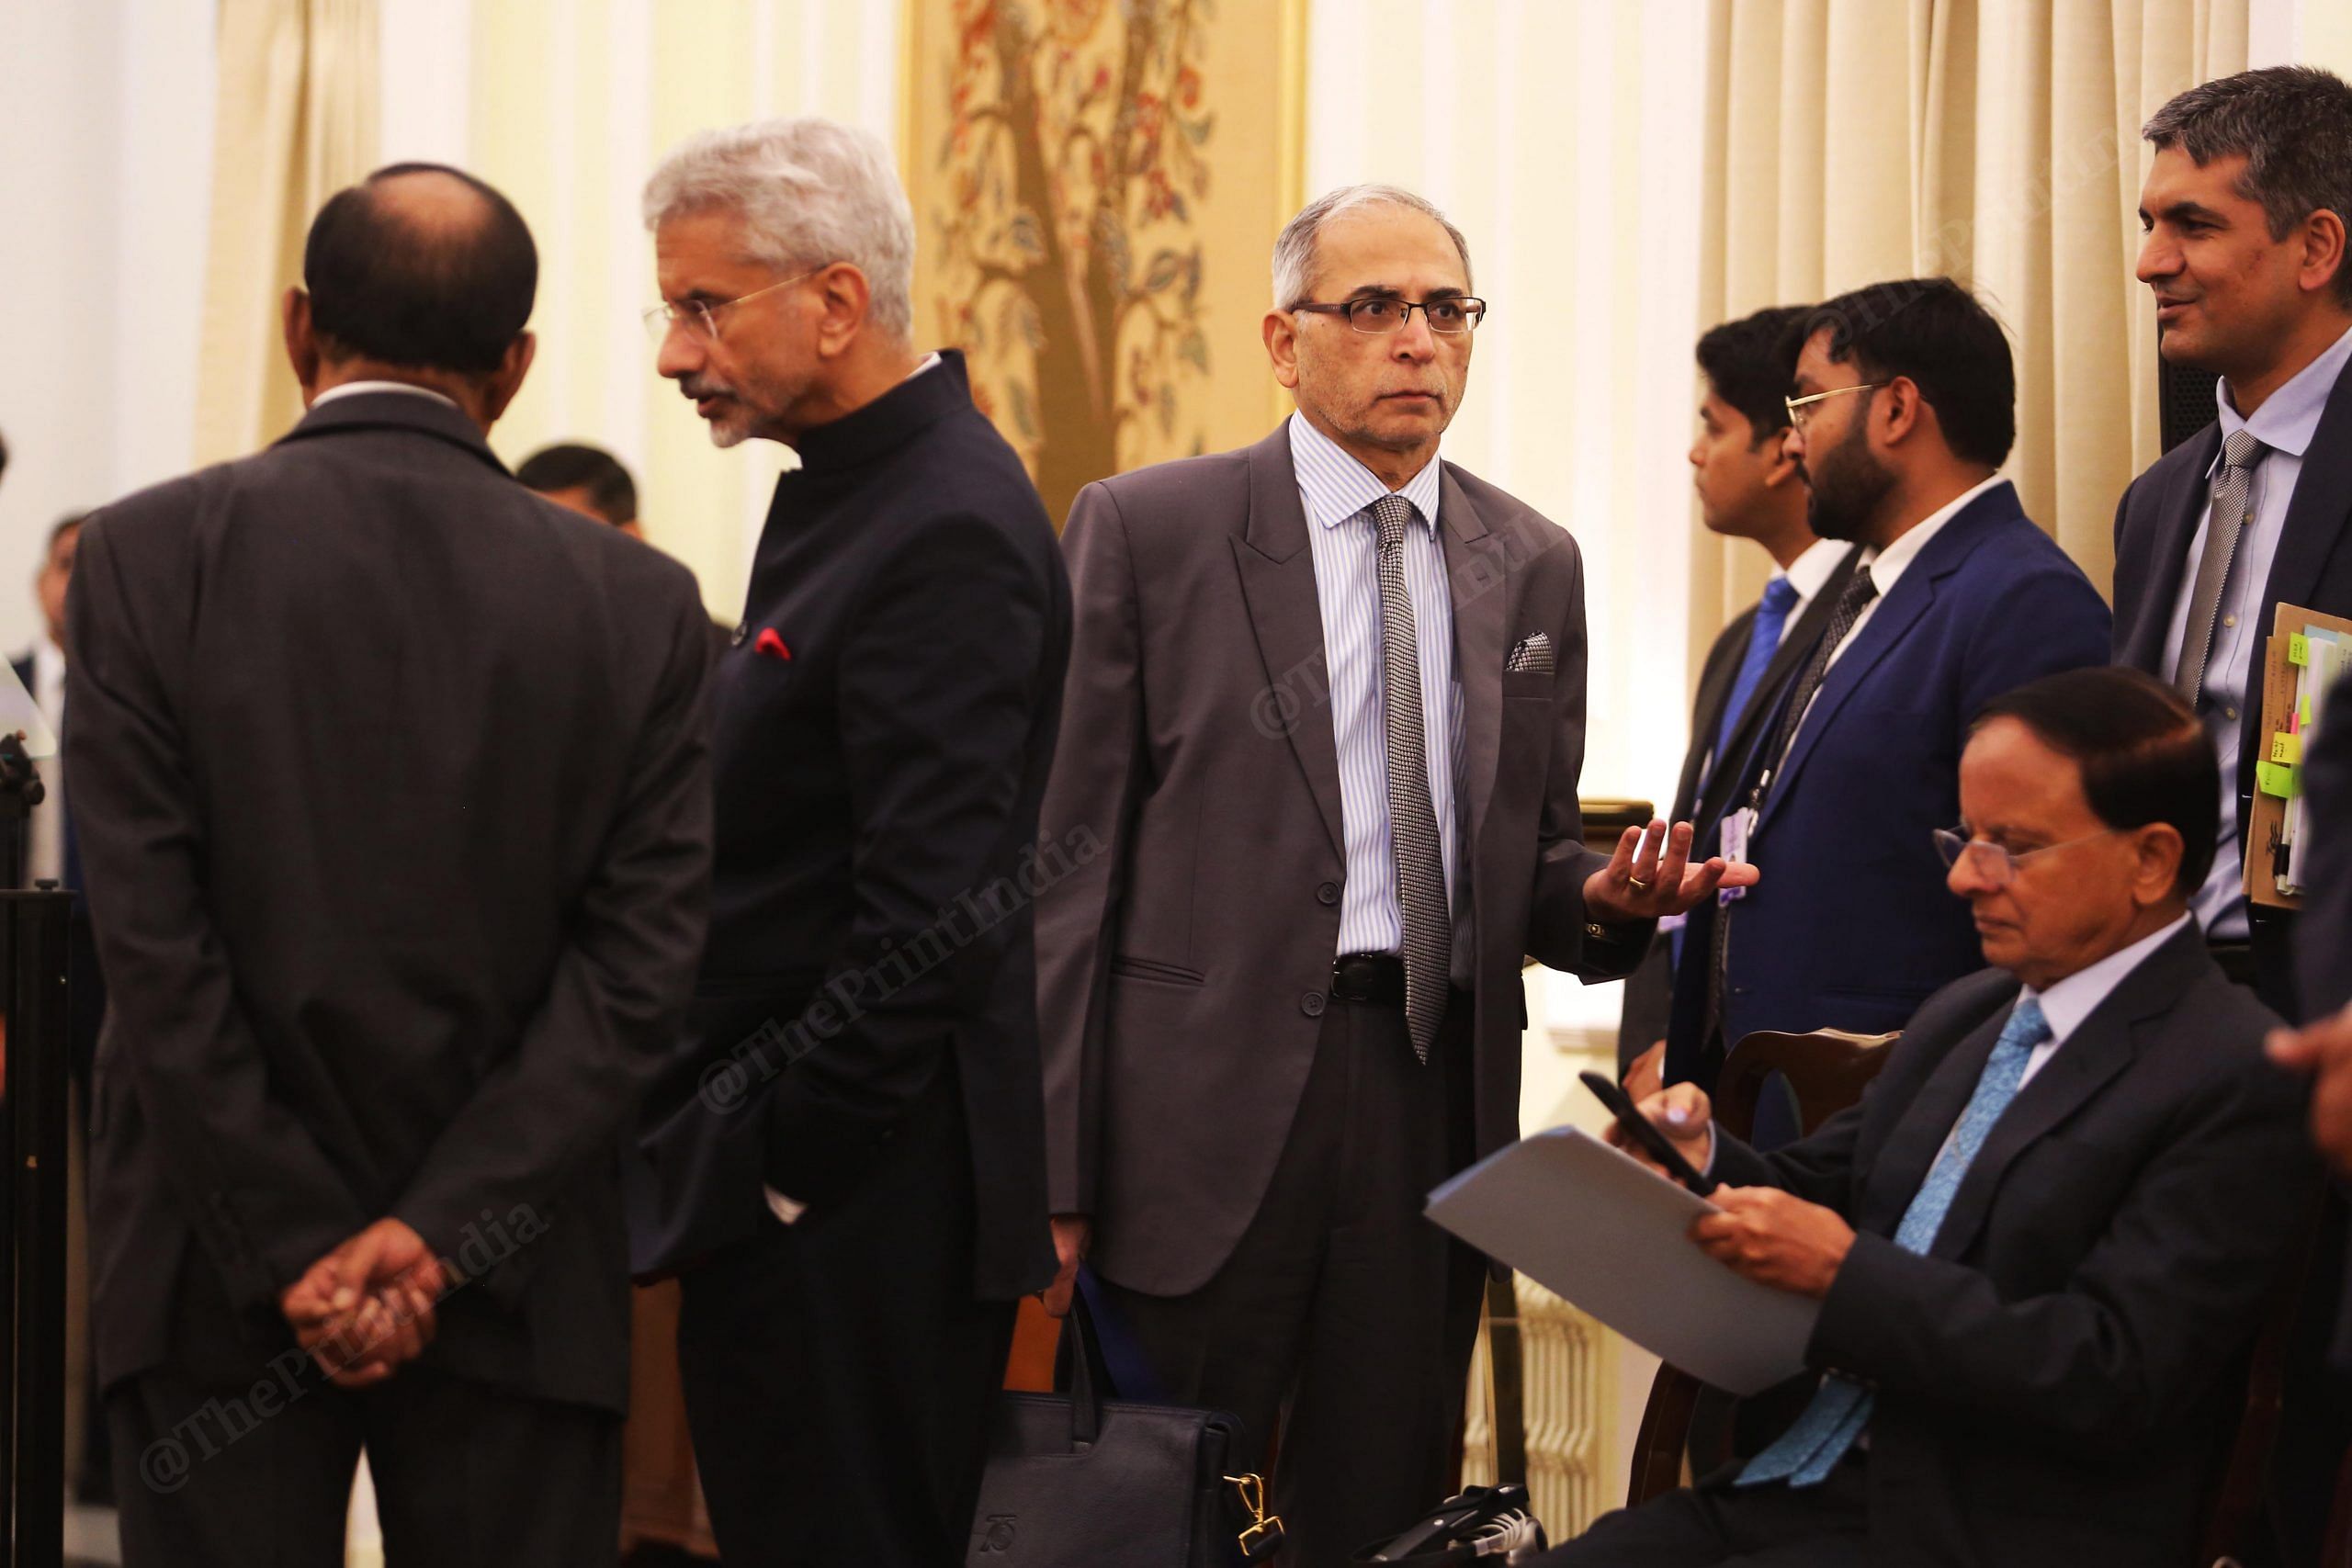 From left to right- NSA Ajit Doval talking to EAM Jaishankar, while foreign secretary Vinay Mohan Kwatra and Principal secretary to the PM P.K. Mishra look for place to sit before the signing agreement event | Photo: Praveen Jain | ThePrint